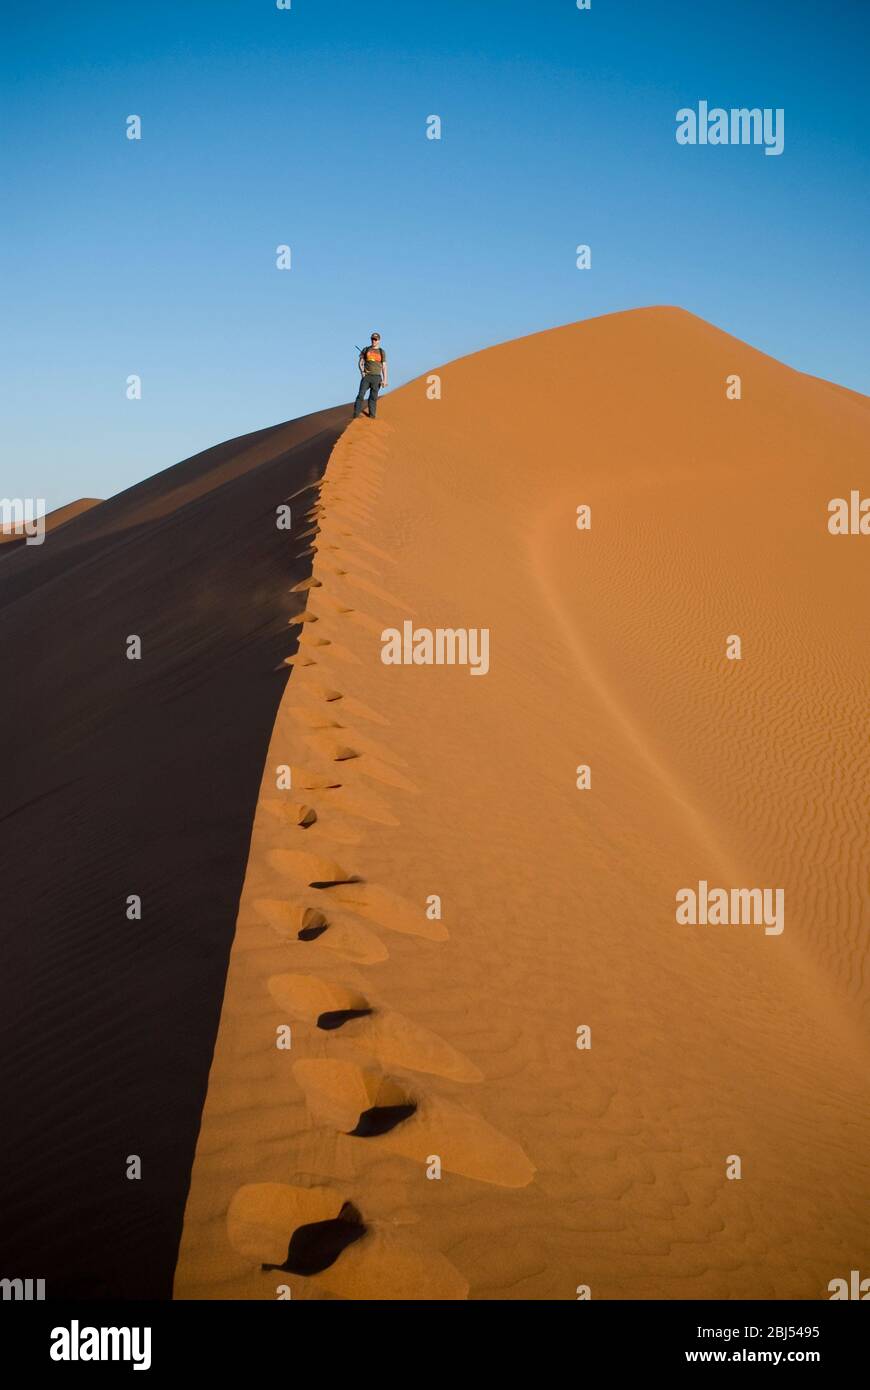 A single man climbing a sand dune at sunset in the Namid desert in Sossusvlei, Namibia, Africa. Portrait format. Stock Photo